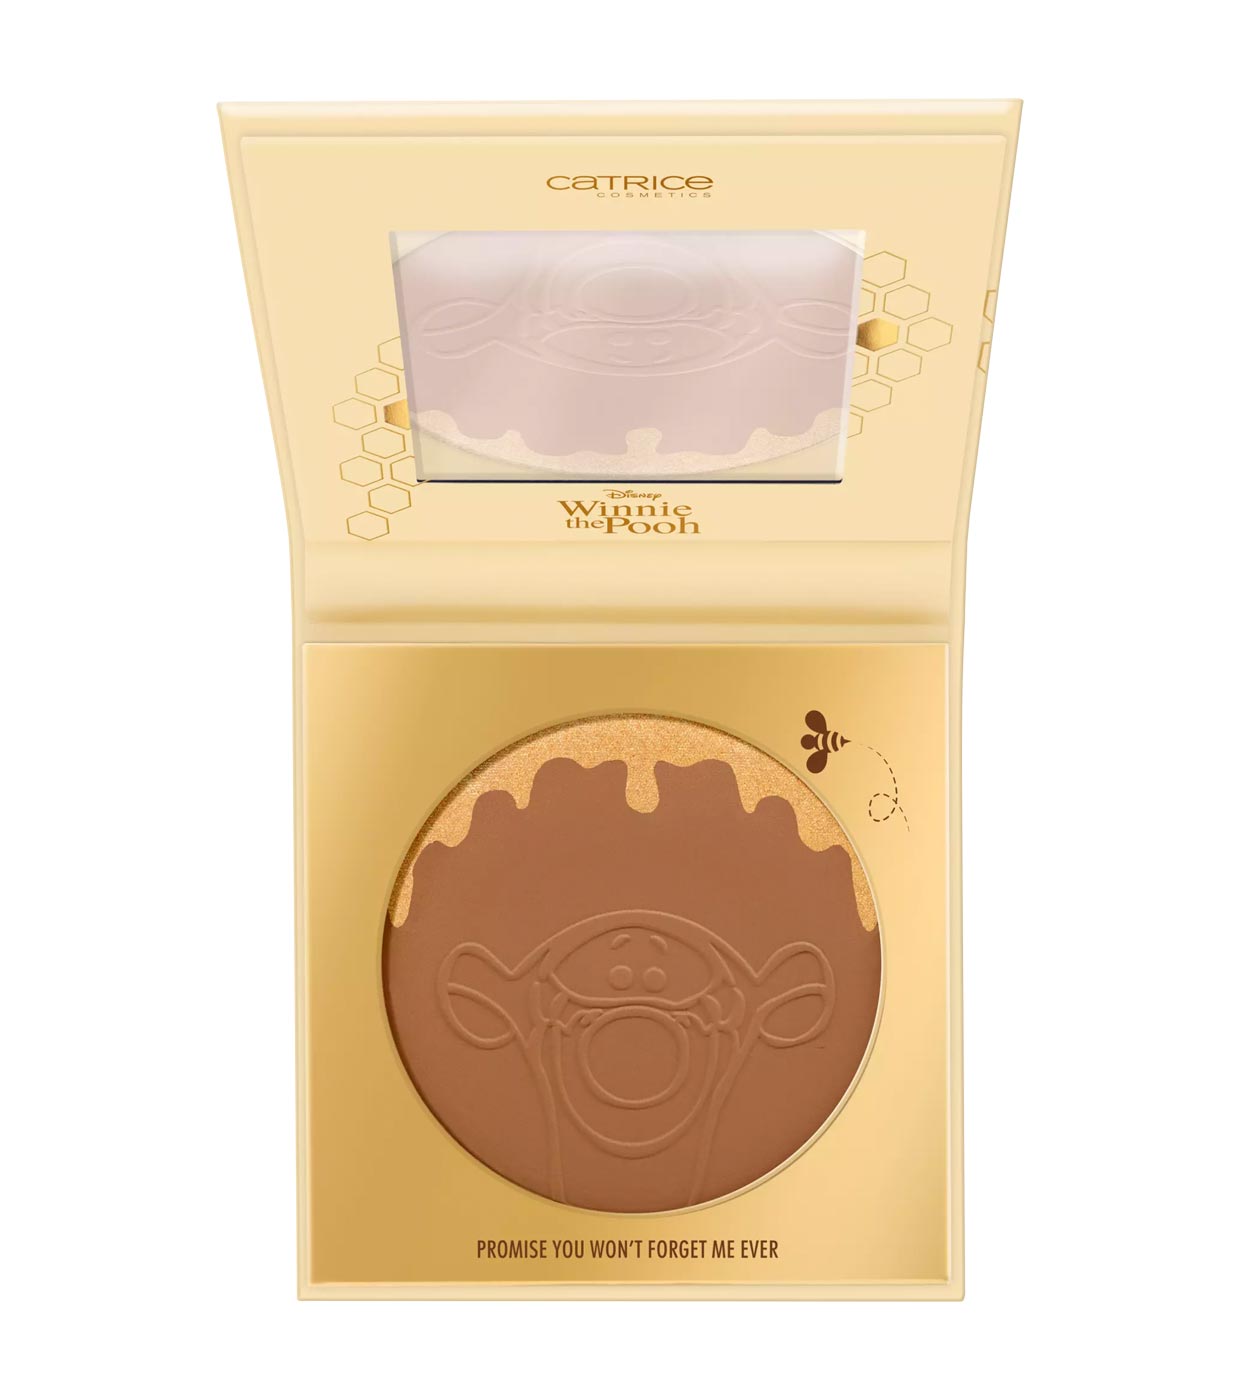 Buy Catrice *Winnie Pooh* | Maquillalia Ever Powder Promise Forget Shimmer Bronzer Subtle Me - - - You the 020: Won\'t